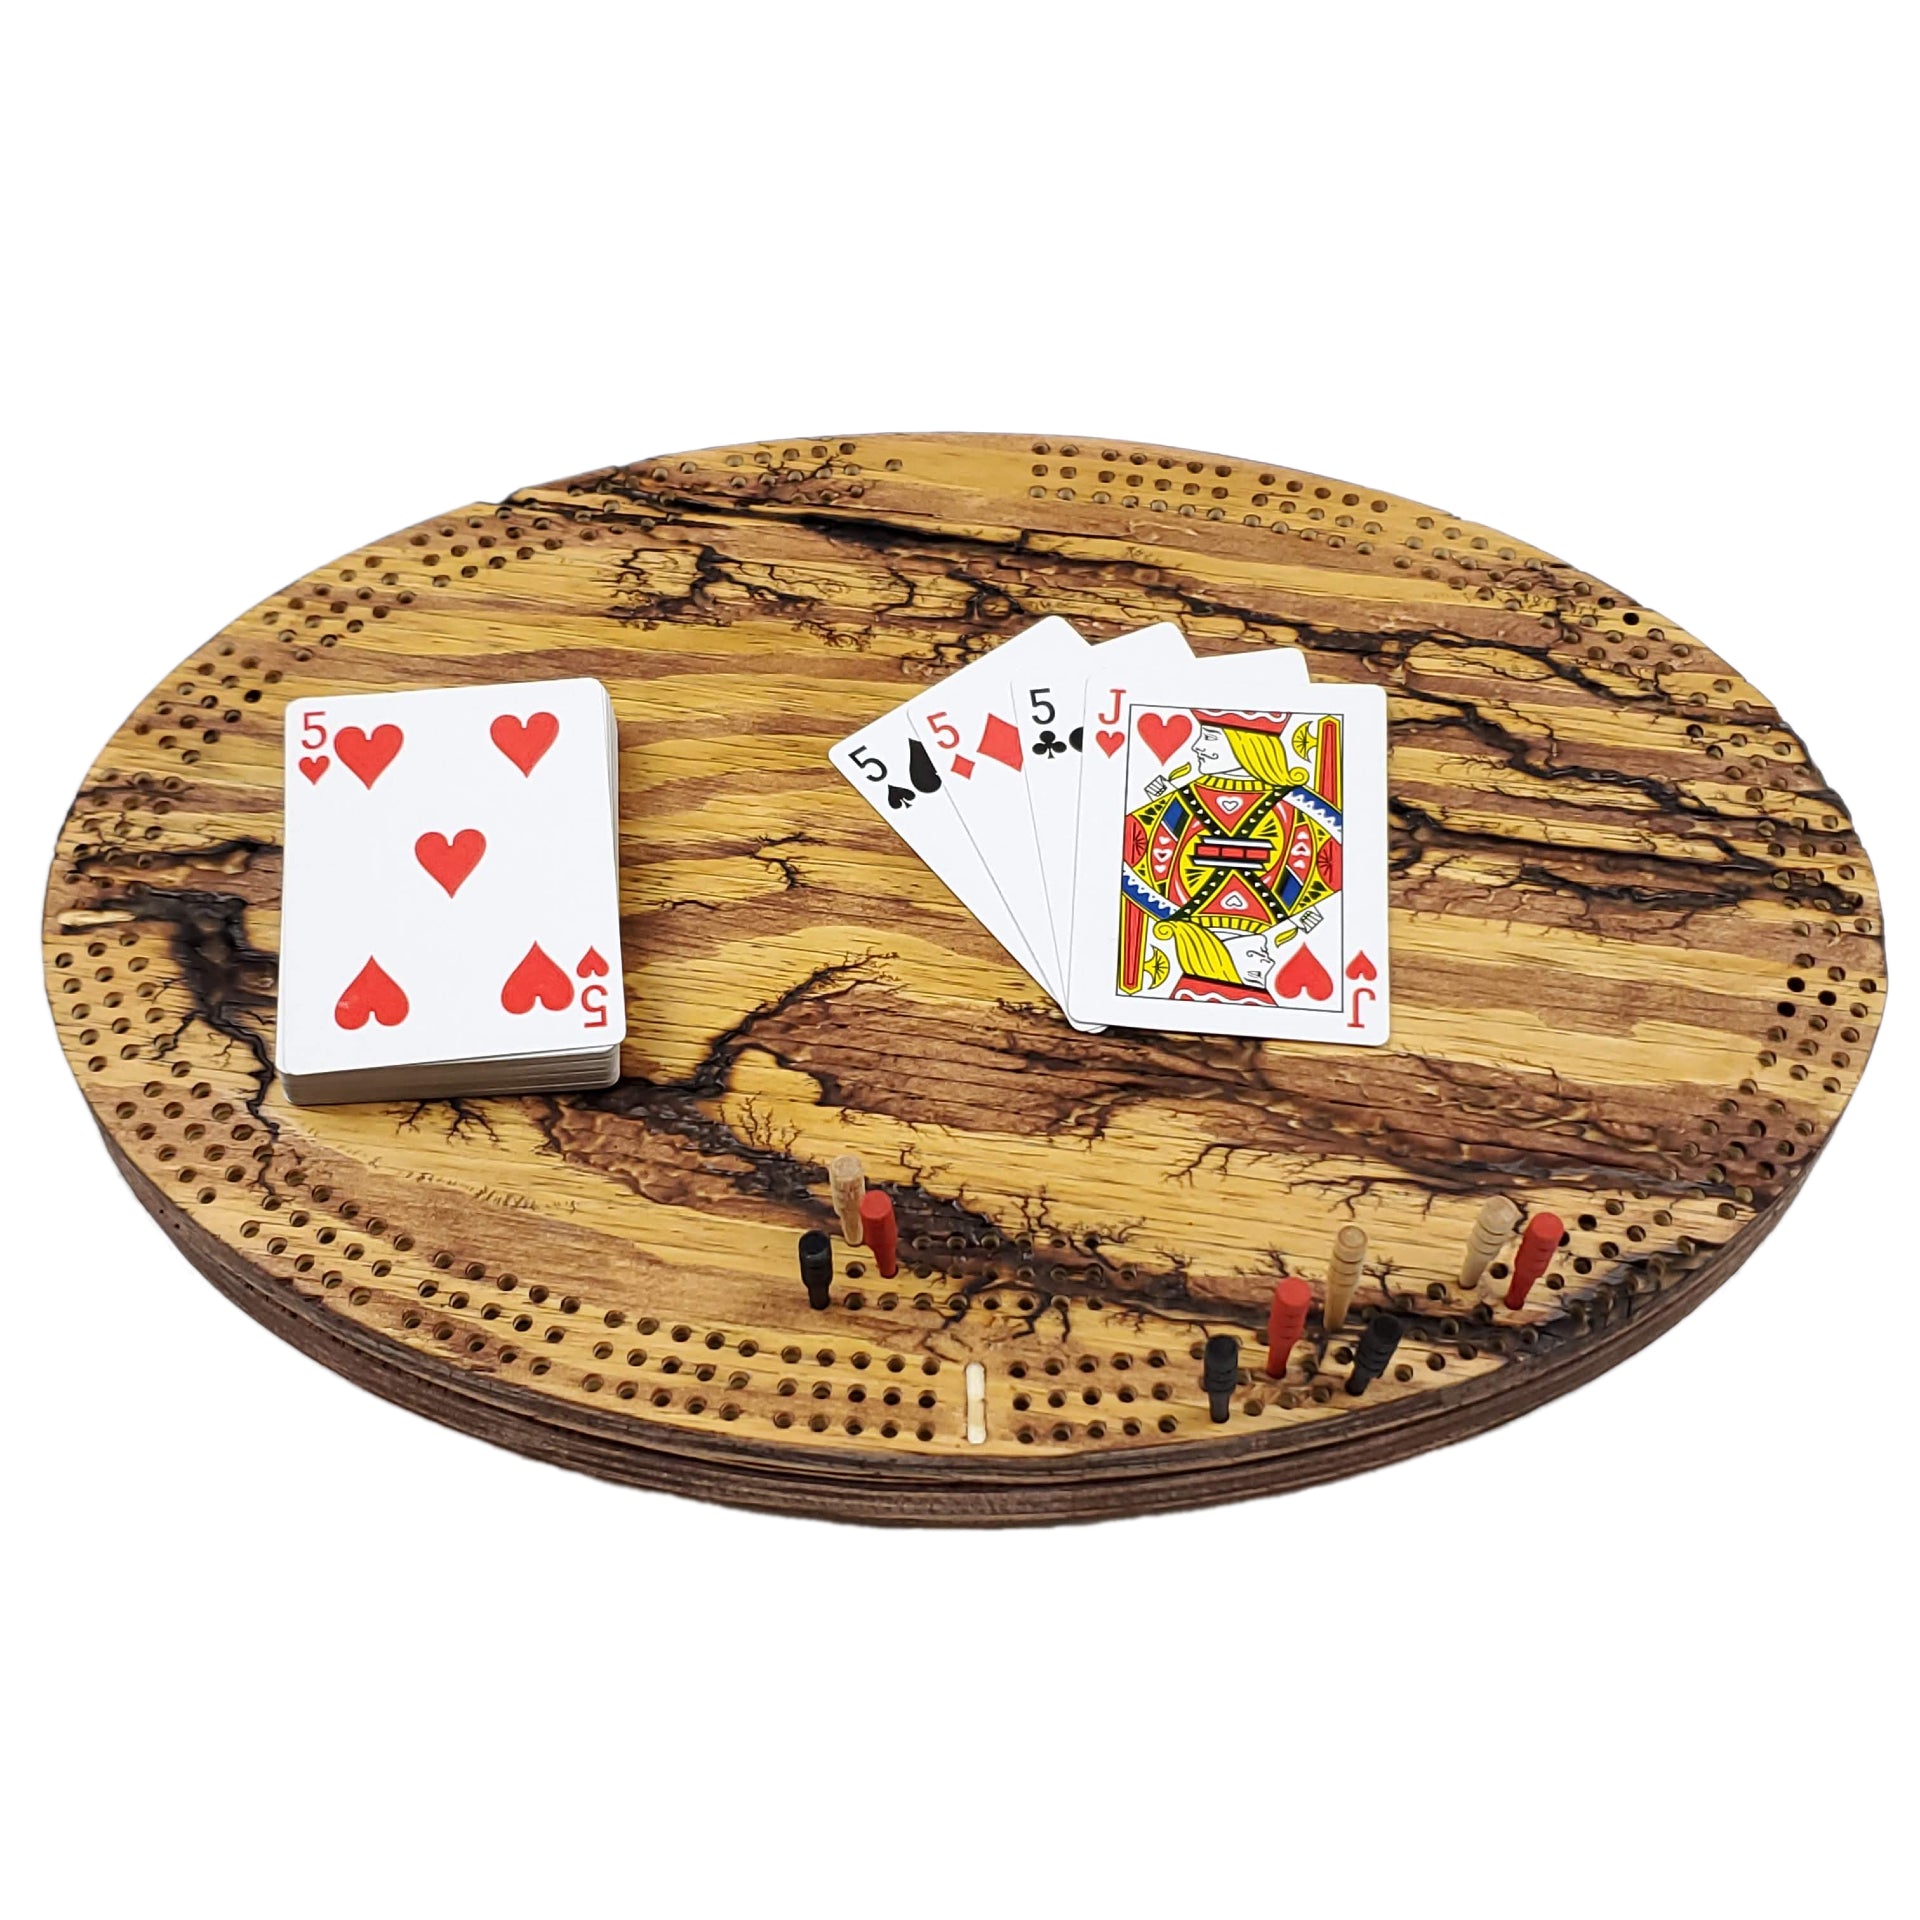 Deluxe Oval Cribbage Board